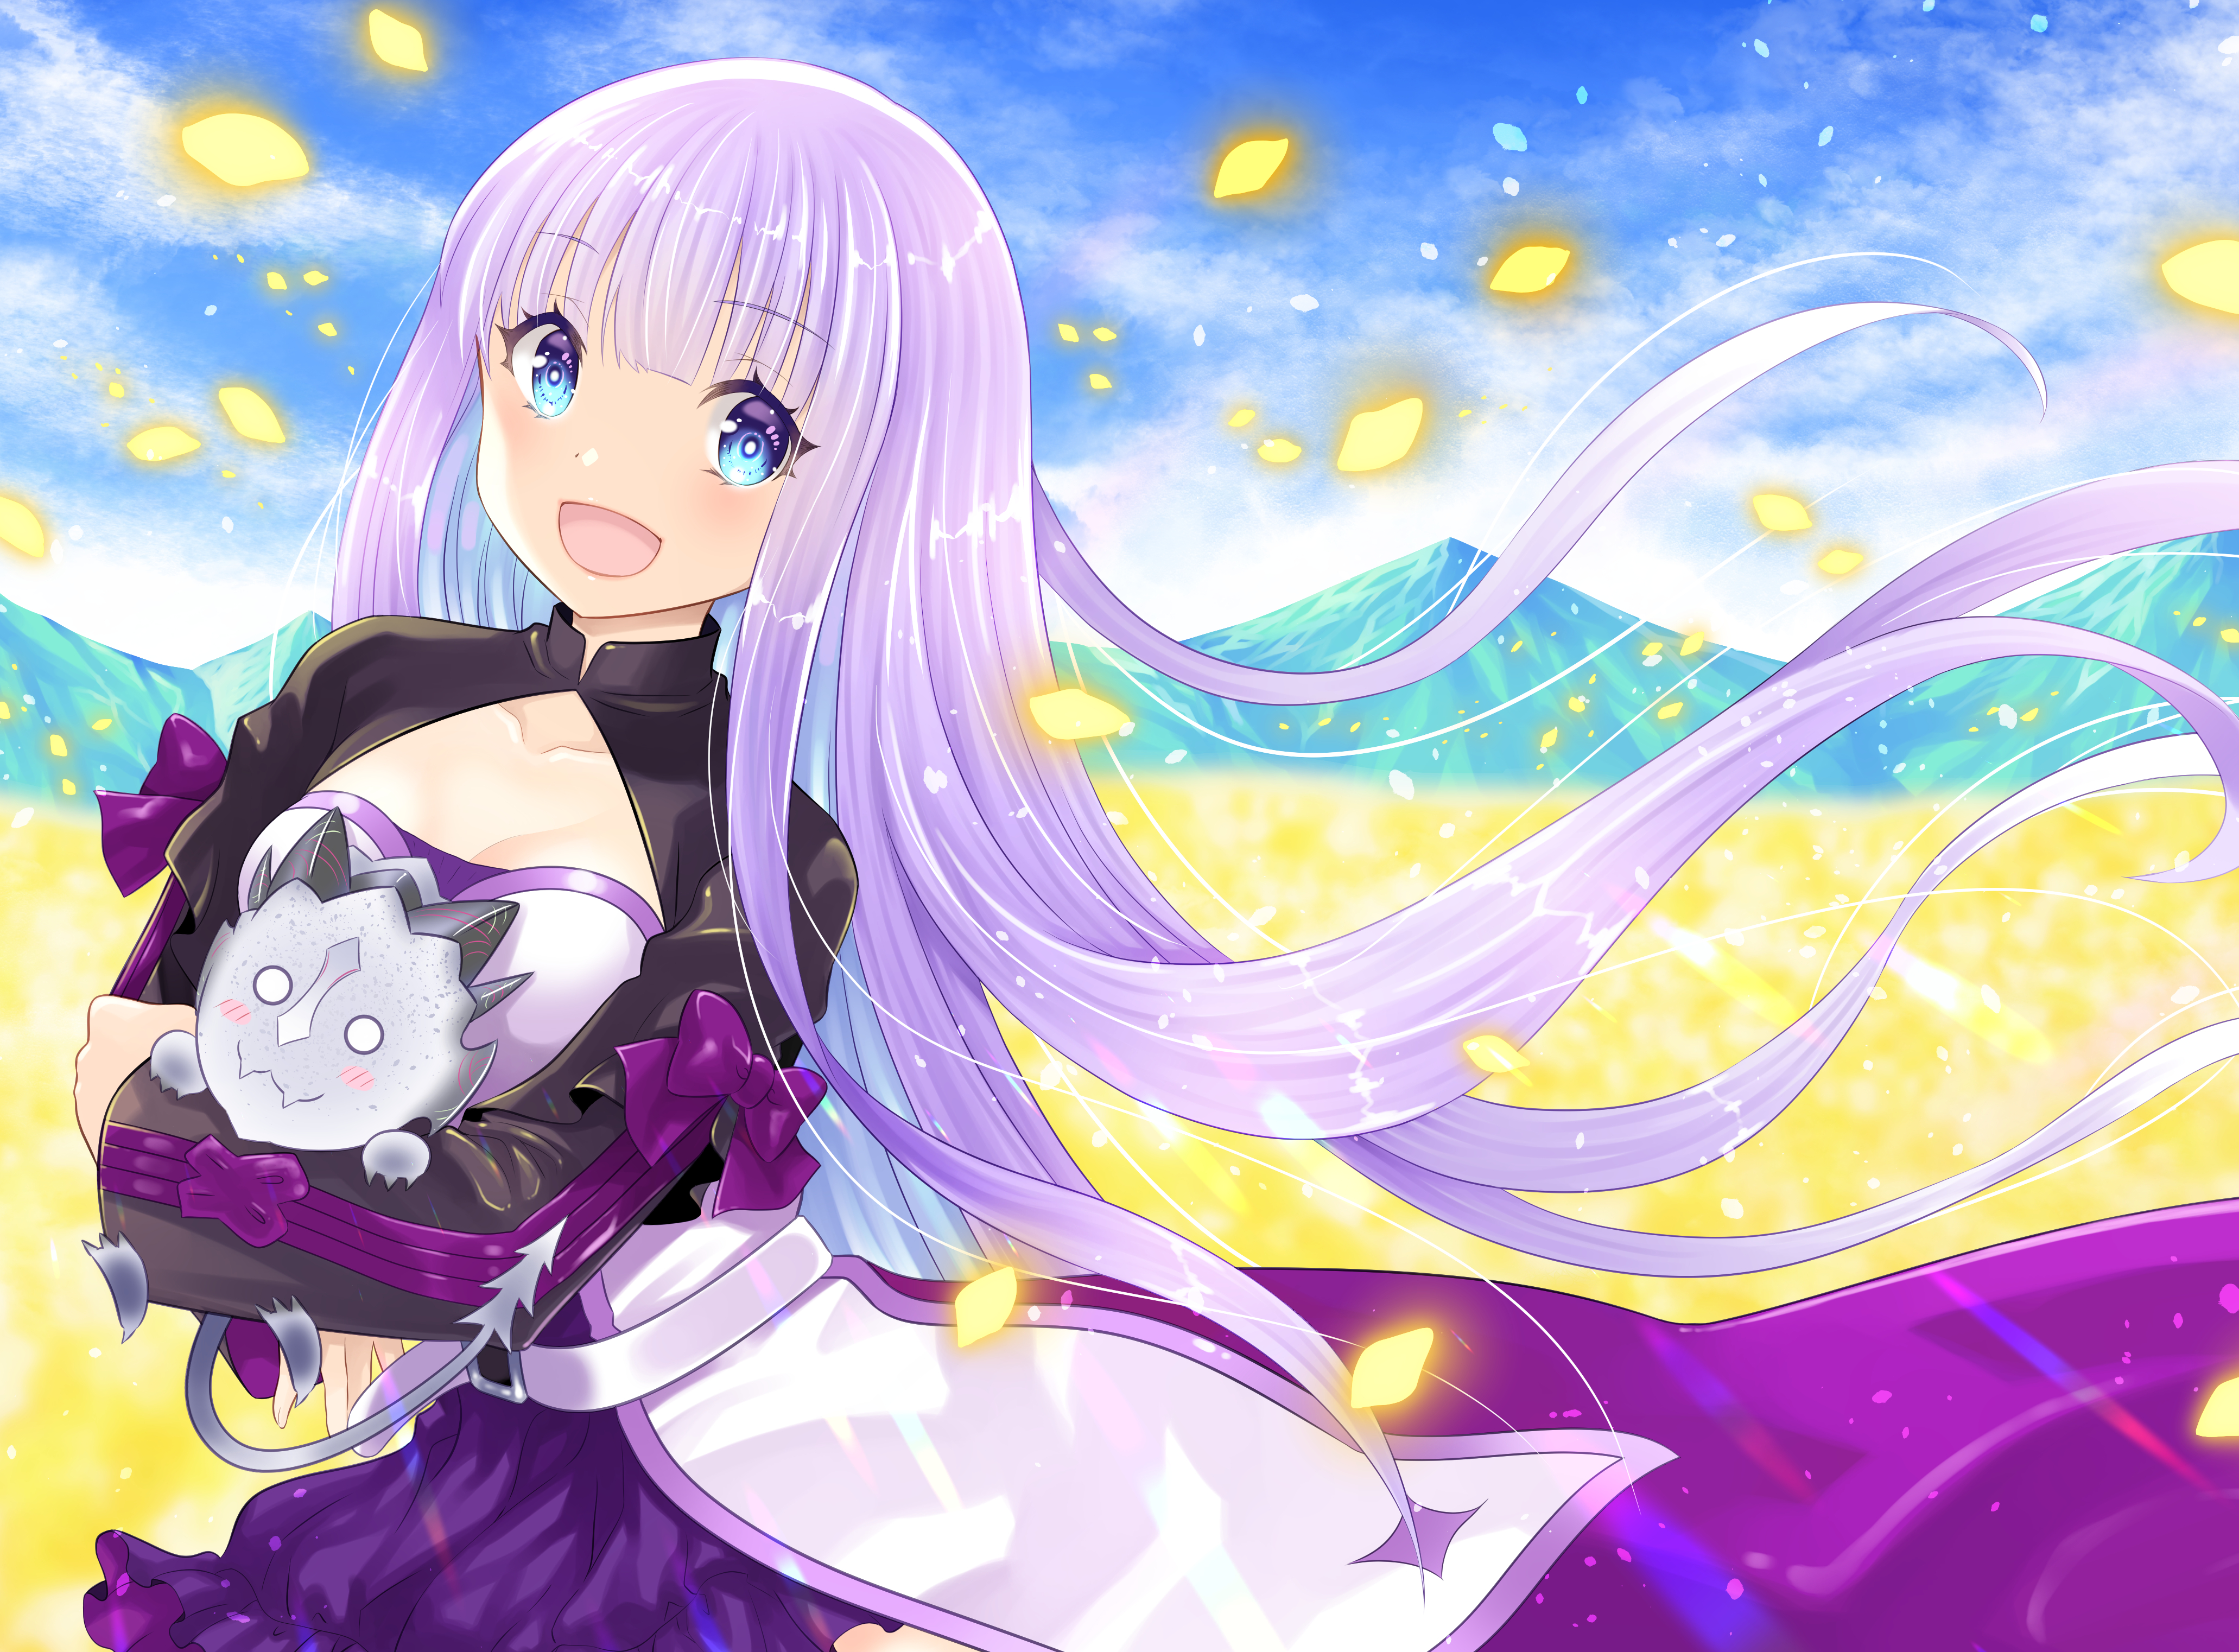 Anime She Professed Herself Pupil of the Wise Man HD Wallpaper | Background Image